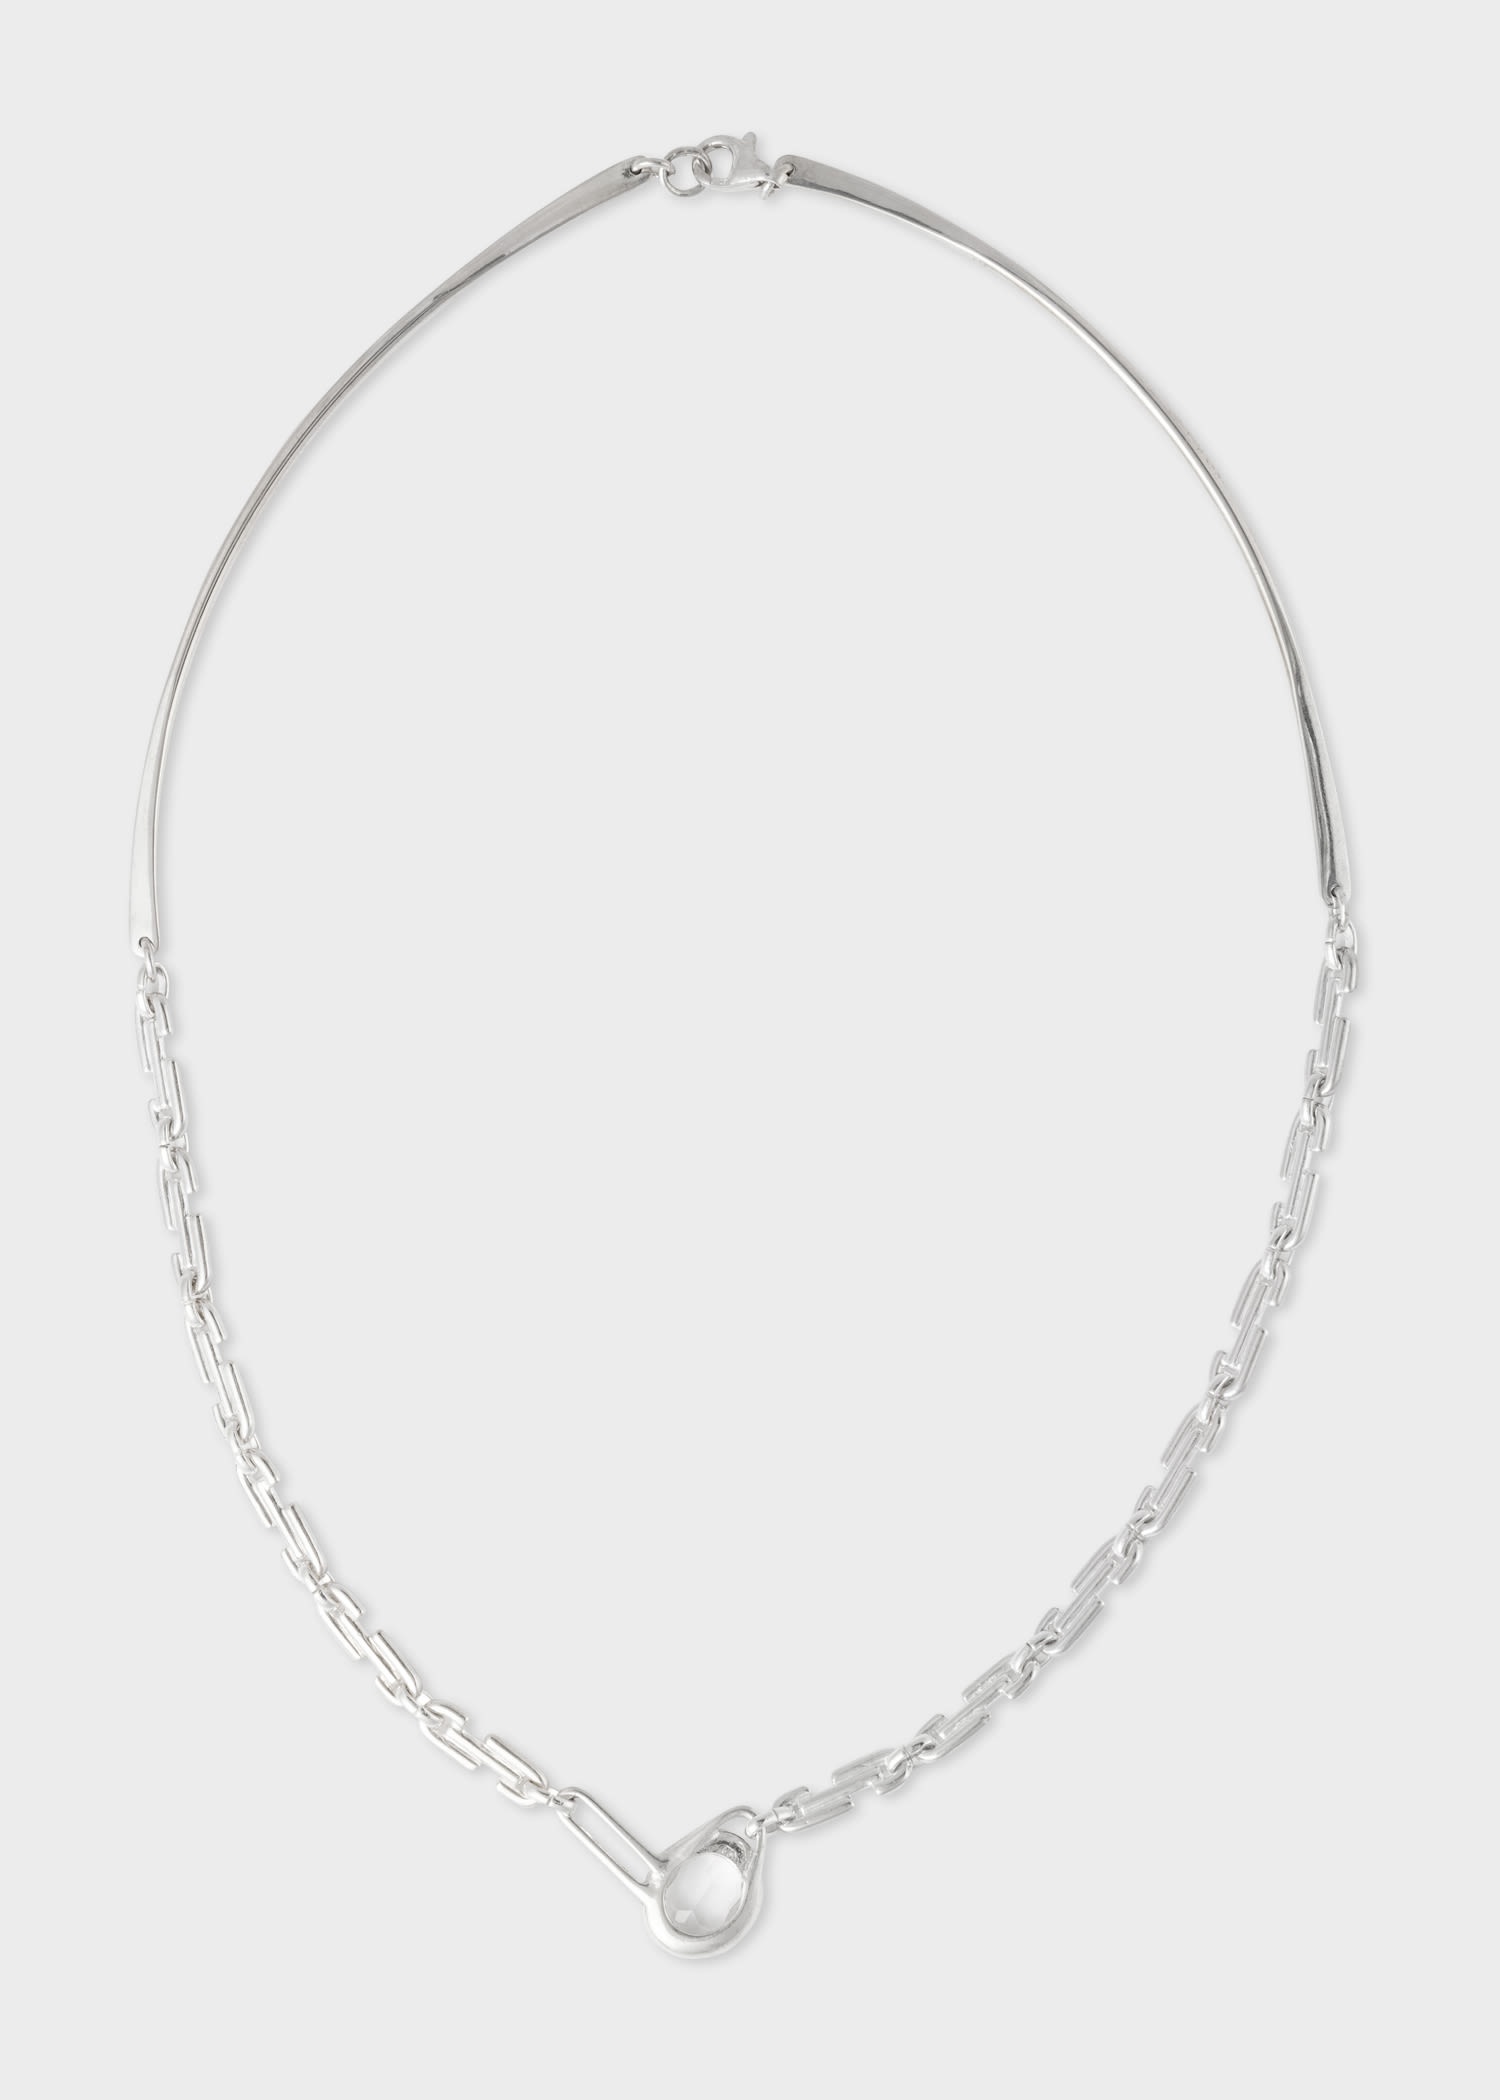 'Tilda' Silver Faceted Crystal Stone Necklace by Helena Rohner - 2